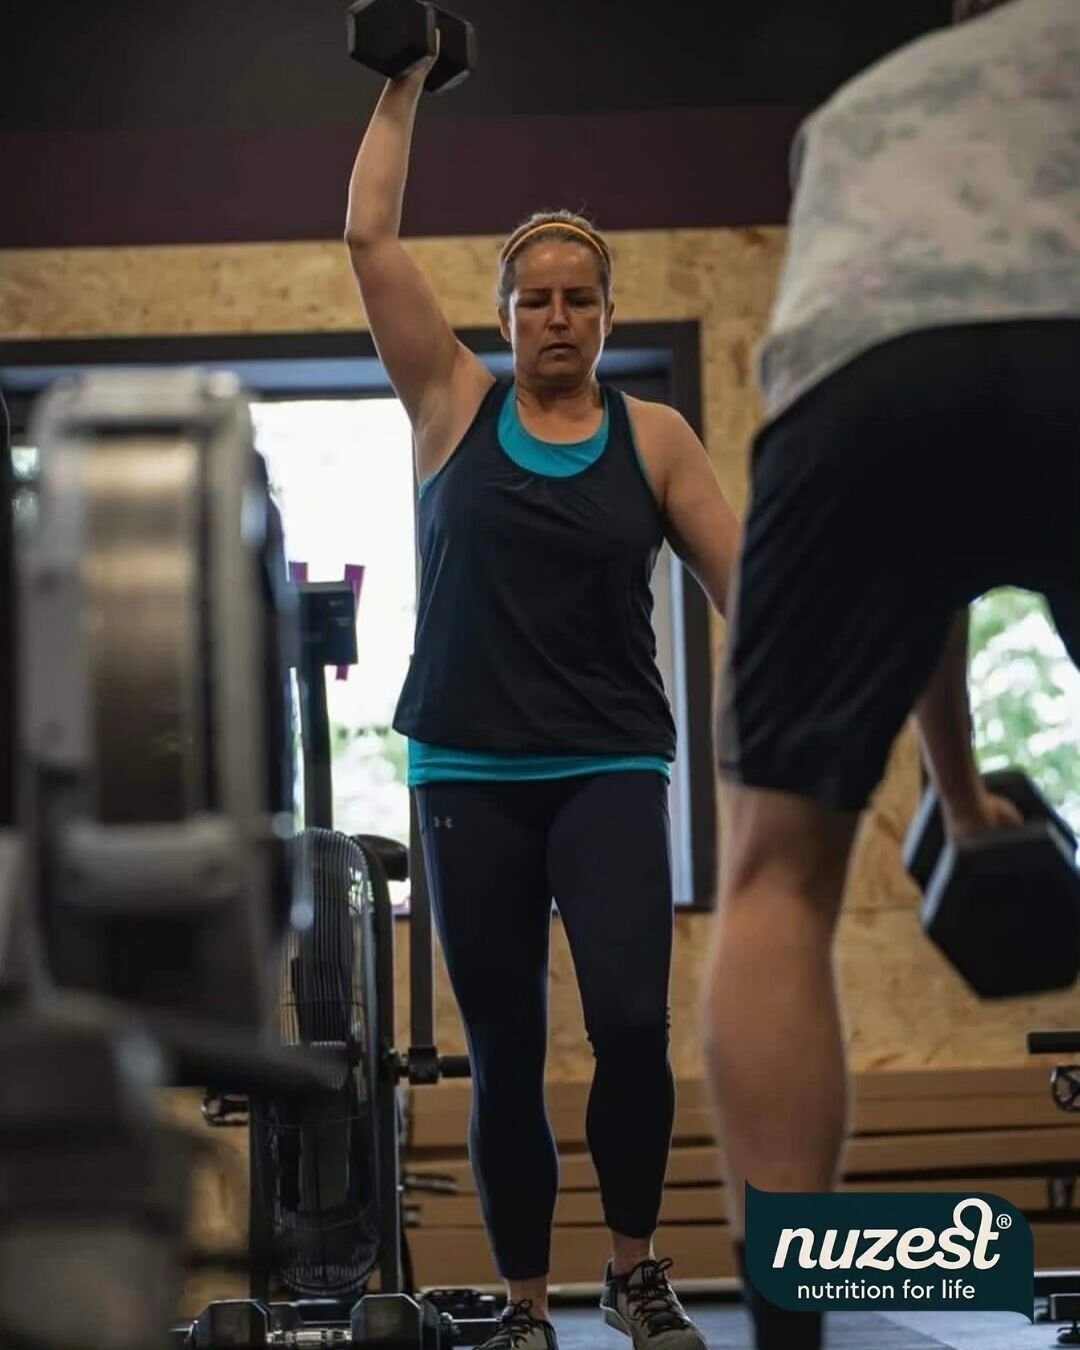 *𝐀𝐓𝐇𝐋𝐄𝐓𝐄 𝐎𝐅 𝐓𝐇𝐄 𝐌𝐎𝐍𝐓𝐇* 

Congratulations Jayne Tremble 🥳 Our @nuzest August athlete of the month! #MemberMention 👆

Our athlete of the month for August is an inspiration, especially for our mums. From CrossFit classes to heroes, we